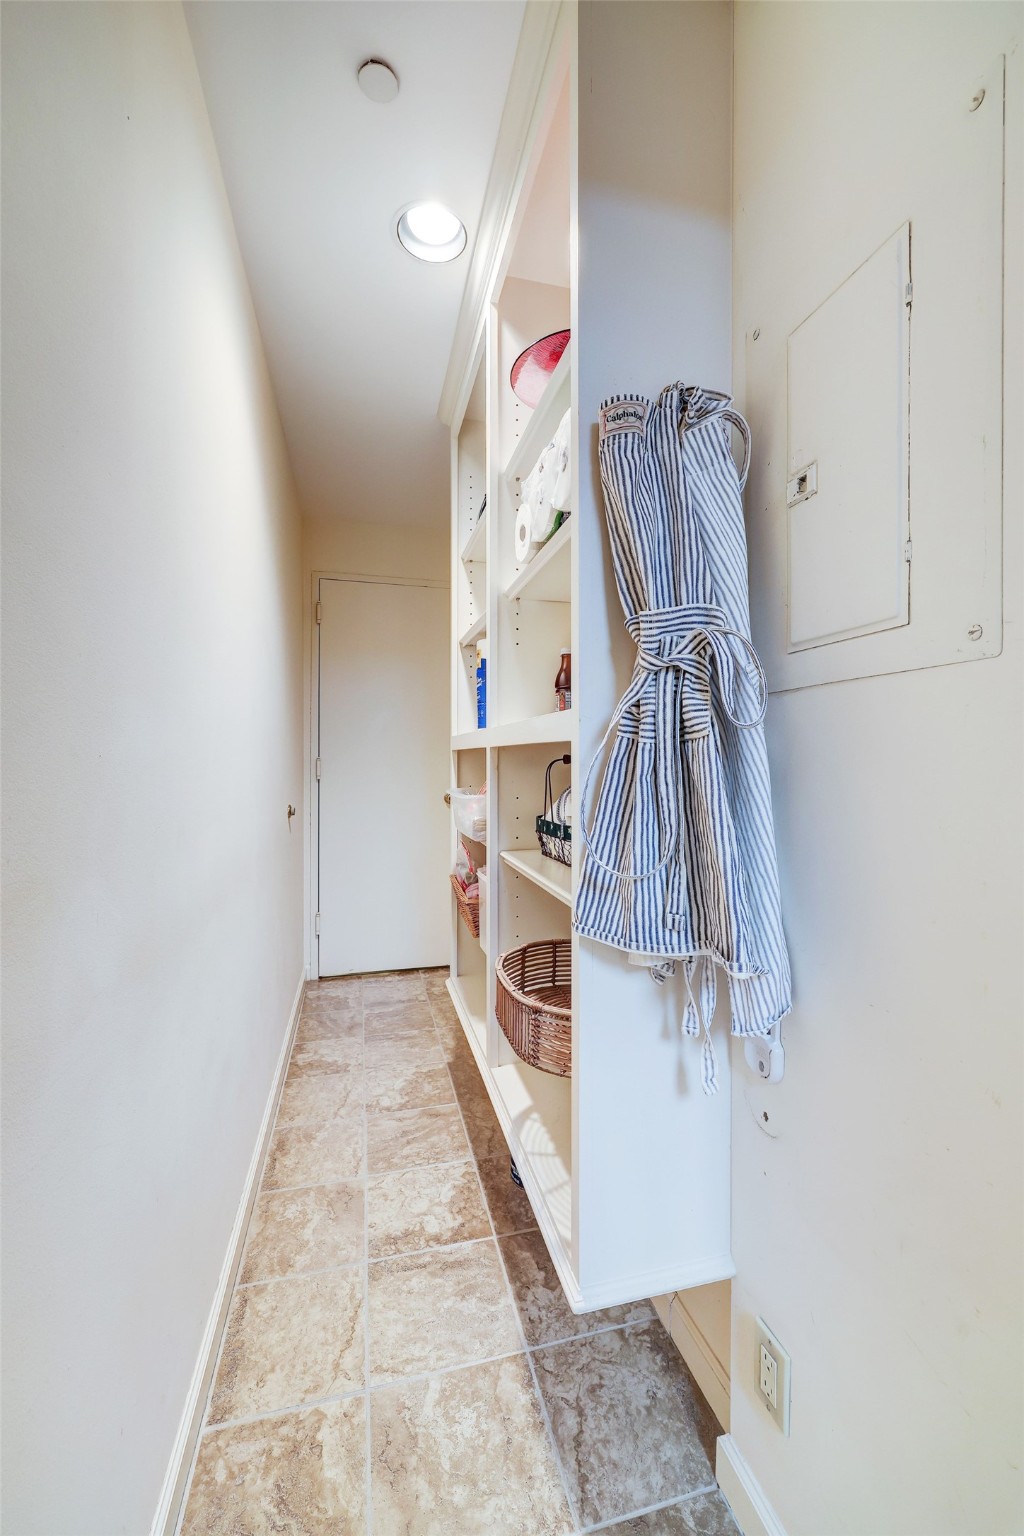 Walk in pantry with built in shelves to make organization easy and accessible